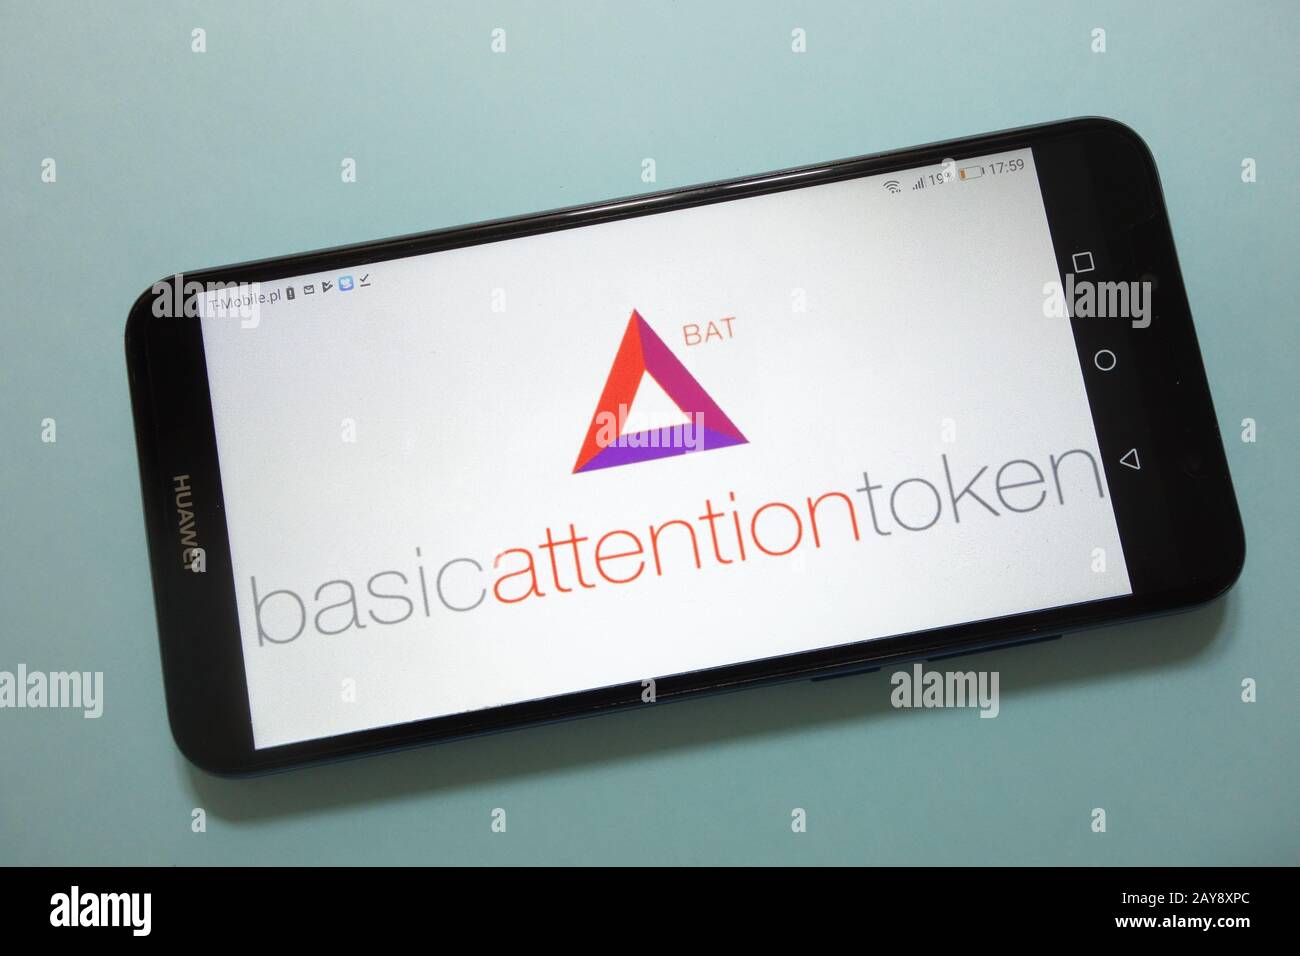 Basic Attention Token (BAT) cryptocurrency logo displayed on smartphone Stock Photo